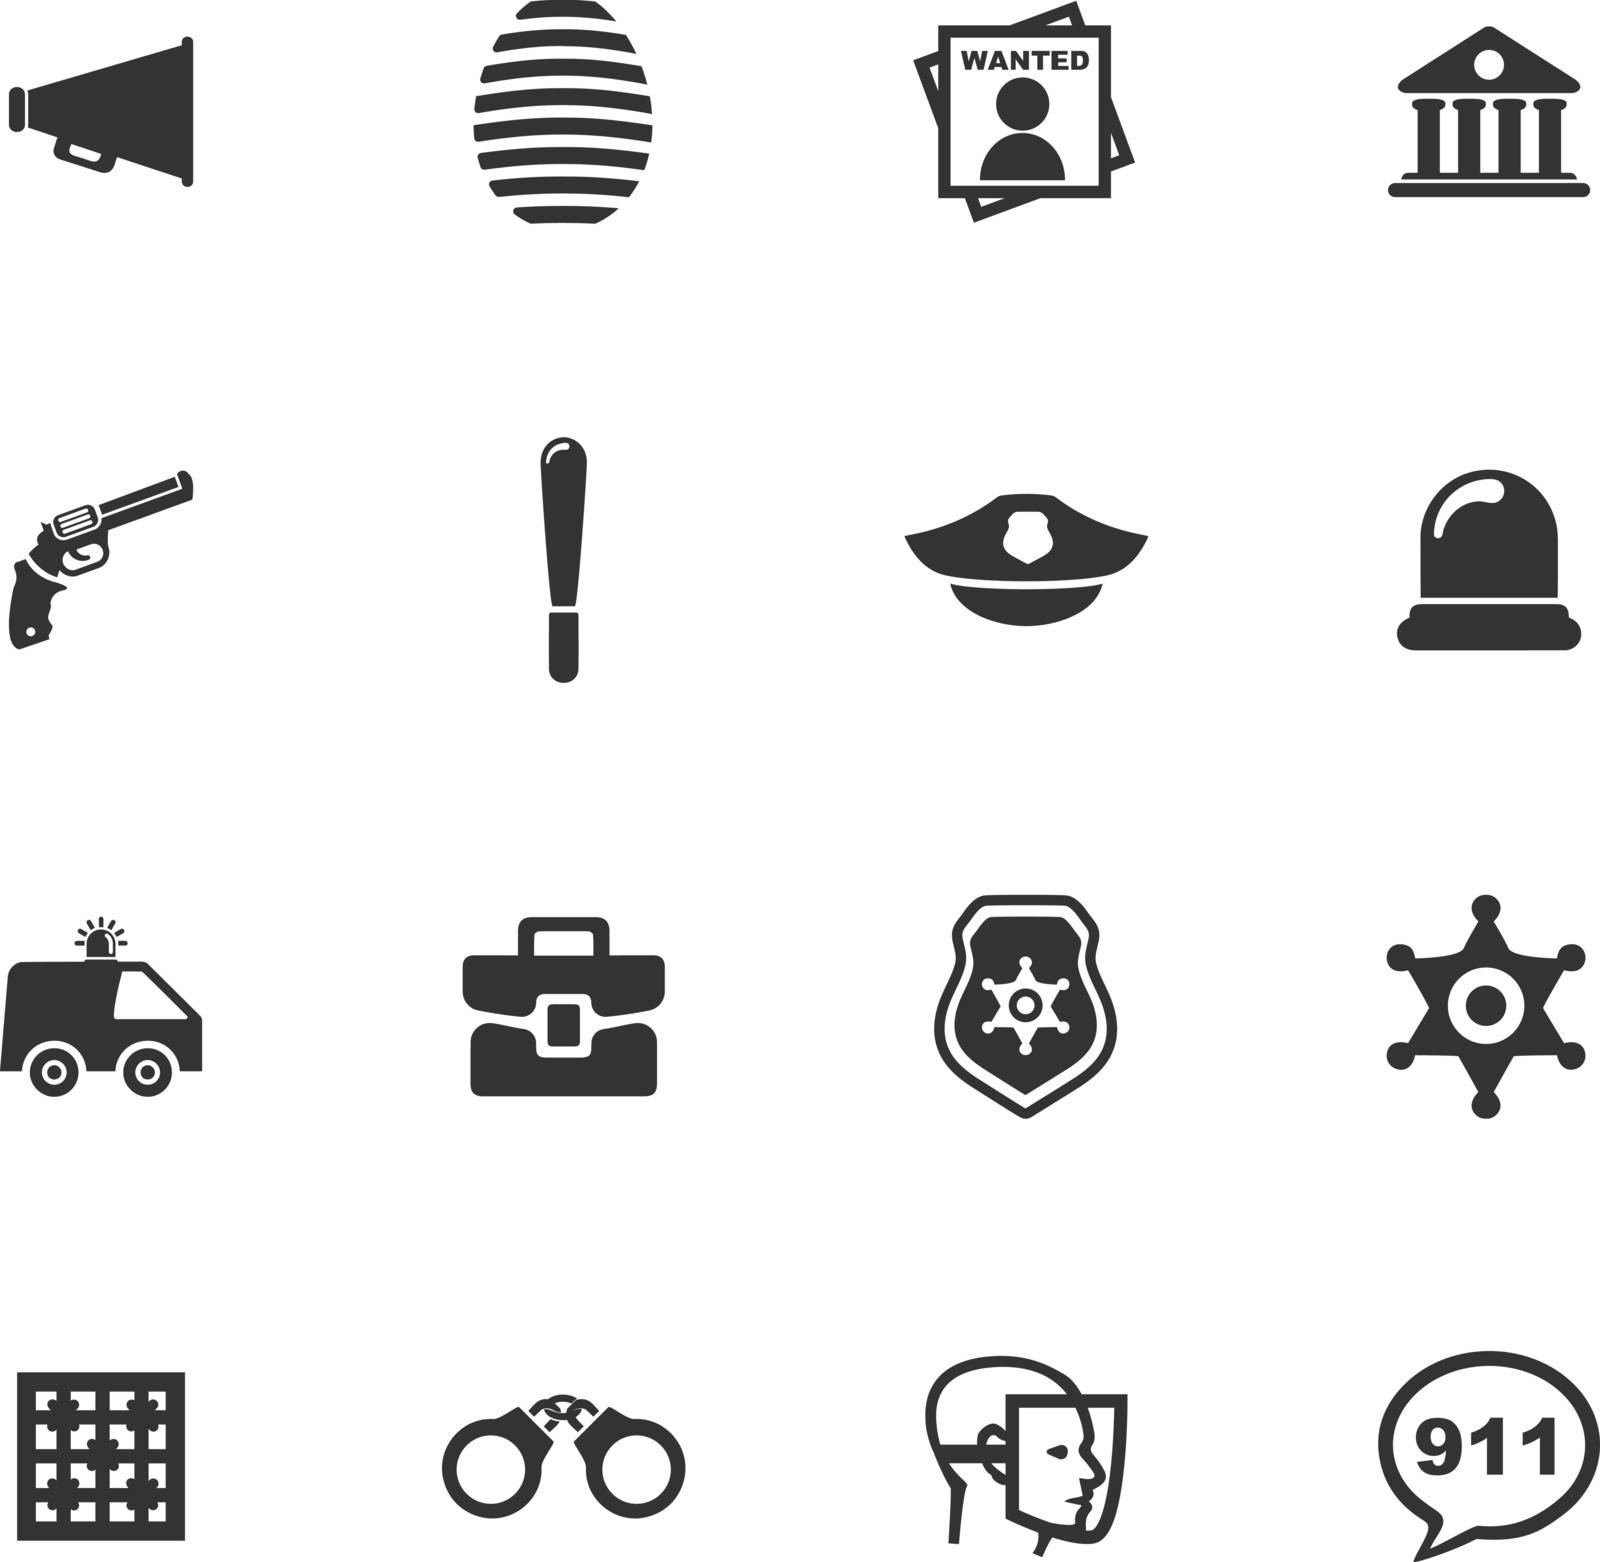 Police icons set by ayax